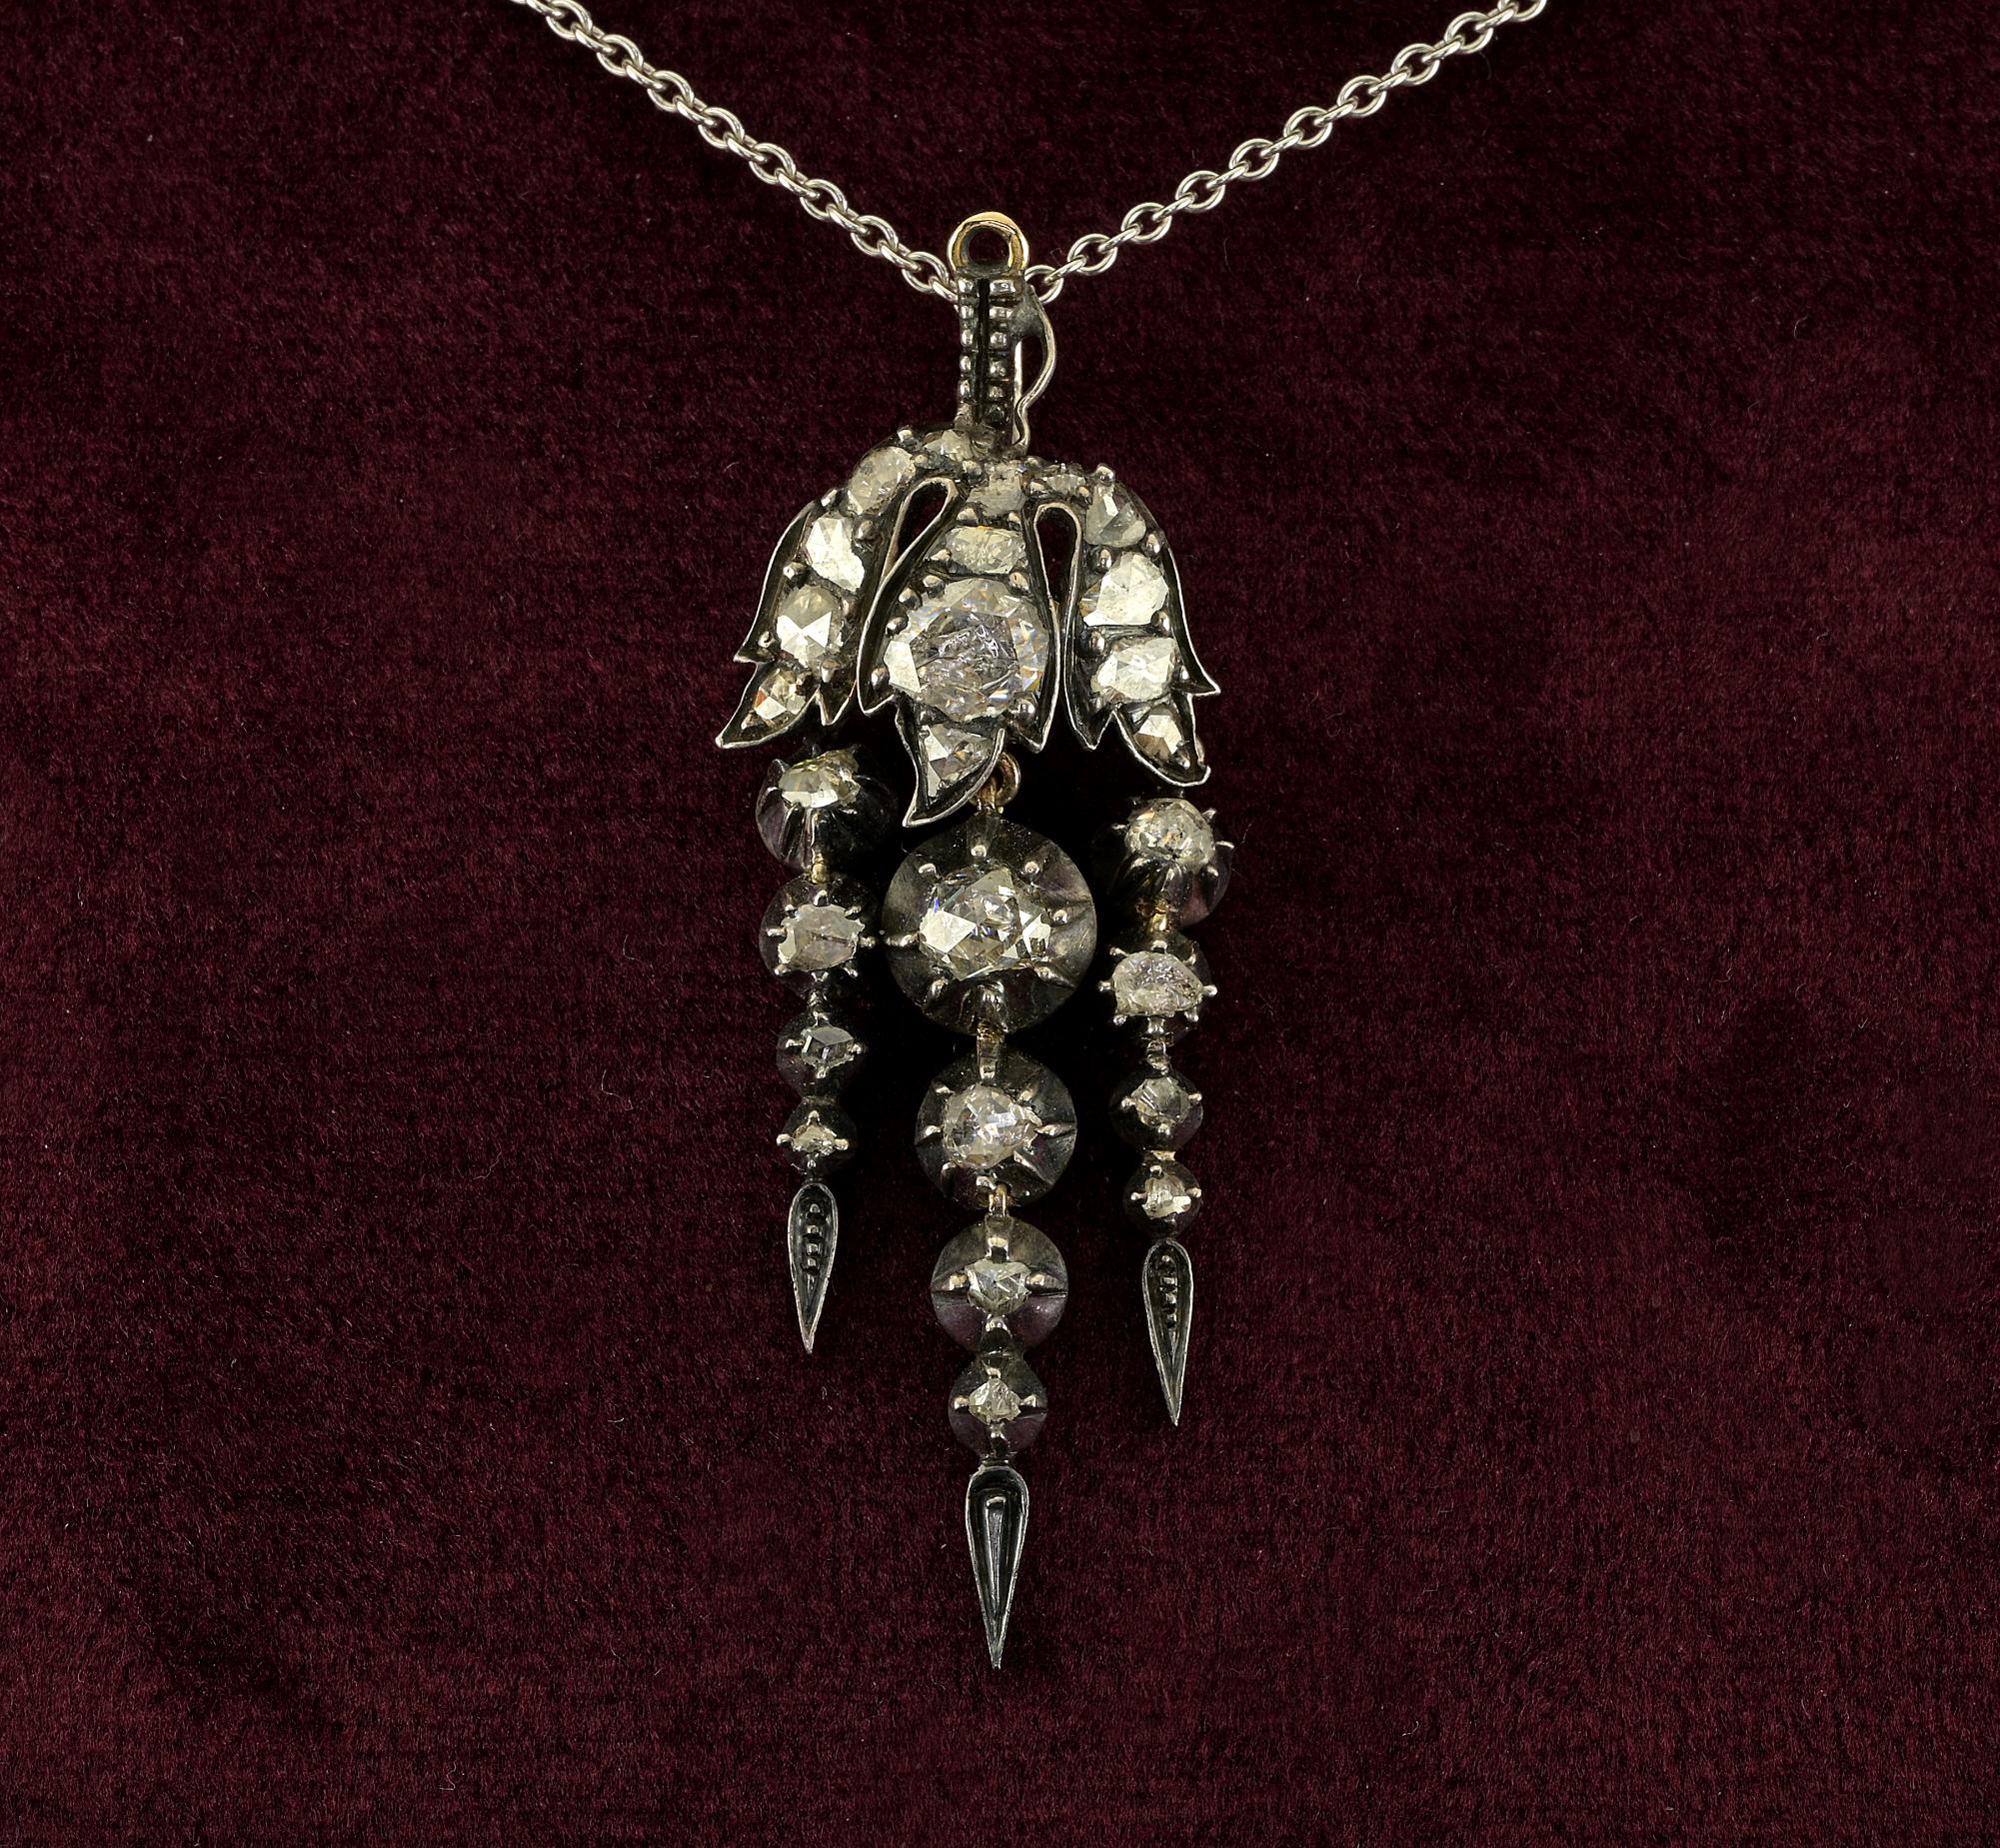 This marvelous Georgian era pendant has been crafted of solid 12 Kt gold topped by silver
Fascinating “En Tremblant” trembling suspended pendeloques typical of the Georgian era, 1780 ca
Adorned with white sparkly rose cut Diamonds for approx 1.30 Ct